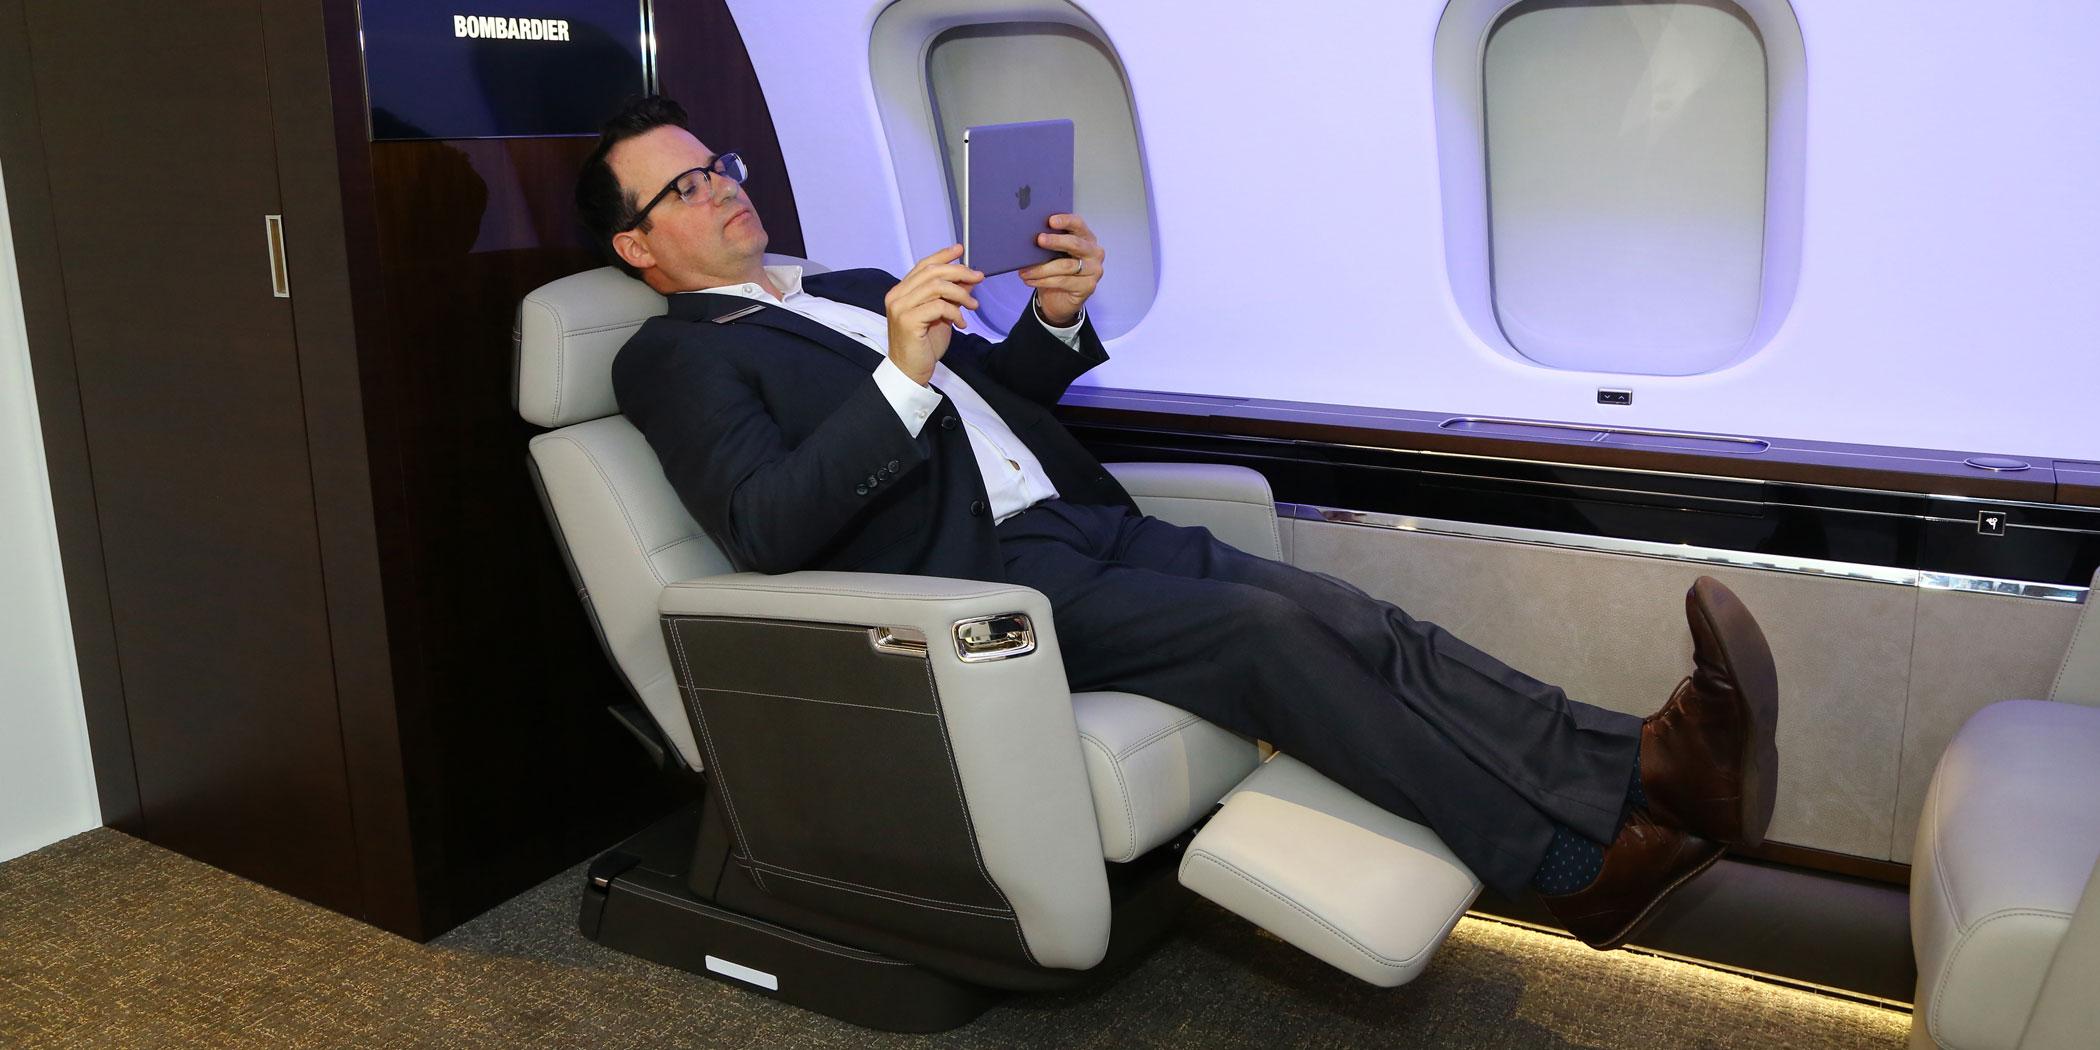 Tim Fagan, Bombardier manager of industrial design, in the Nuage seat Photo: David McIntosh